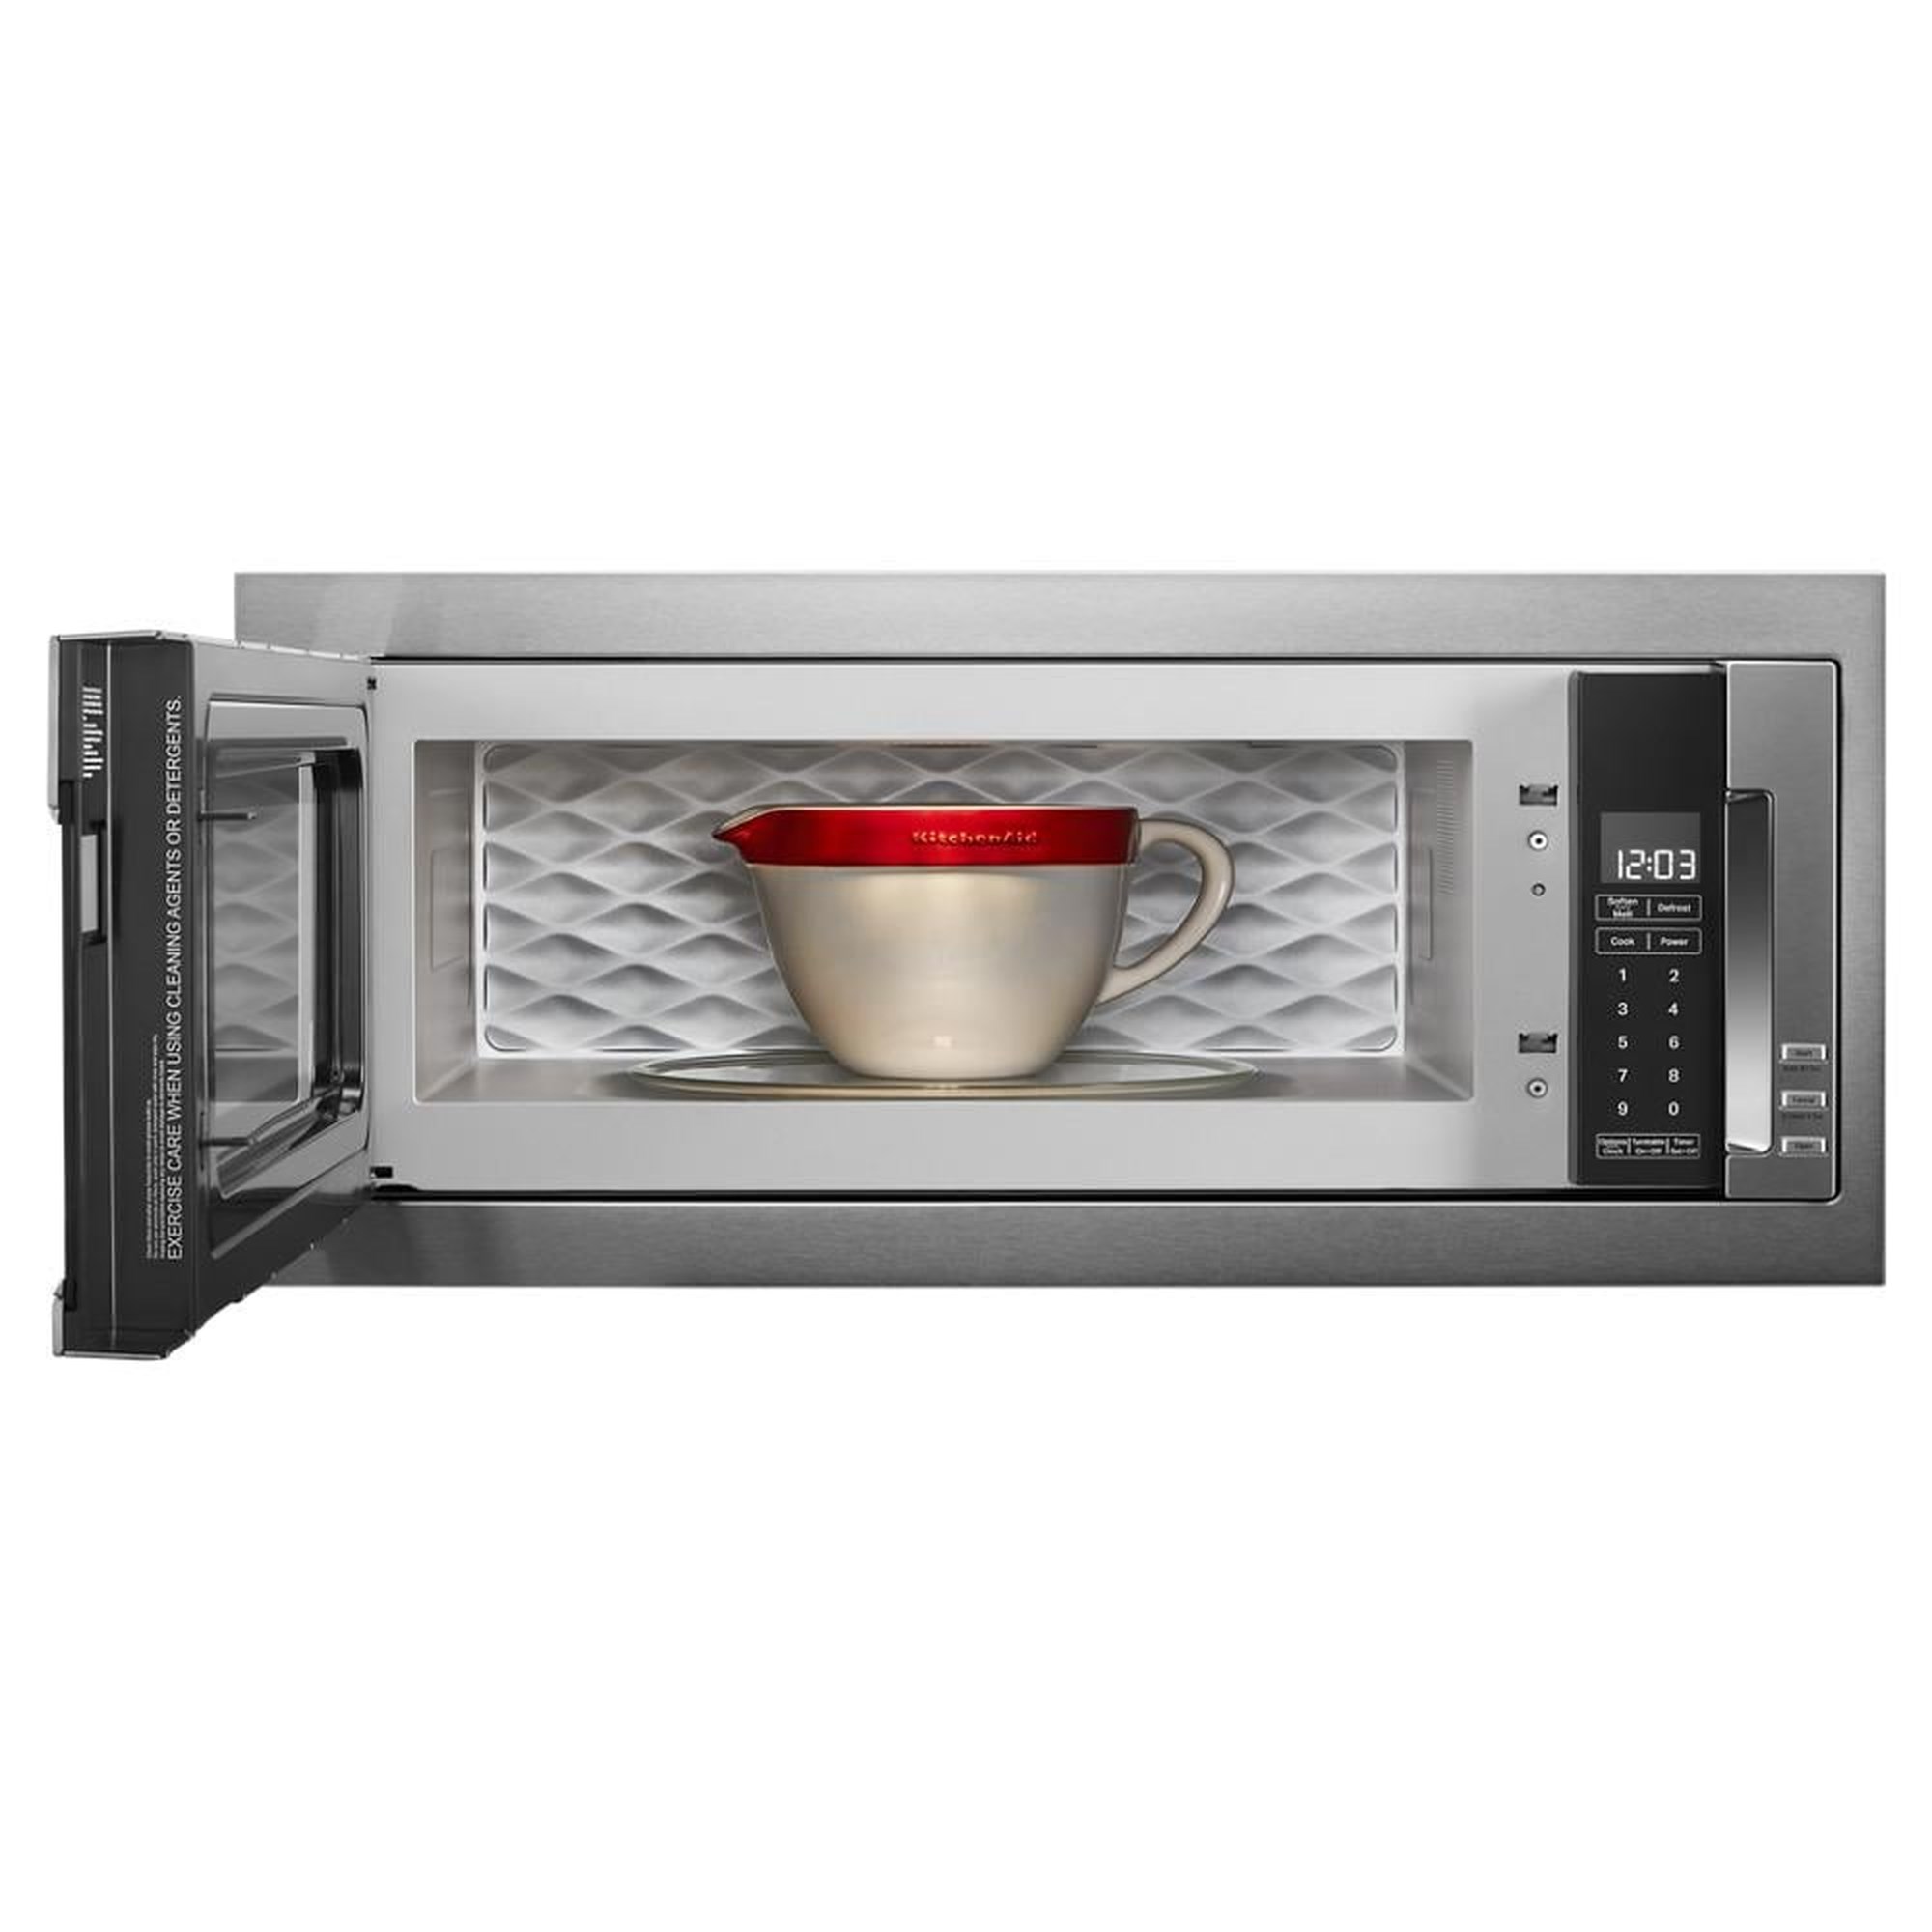 KitchenAid KMBS104ESS 24 Built In Microwave Oven with 1000 Watt Cooking, Simon's Furniture